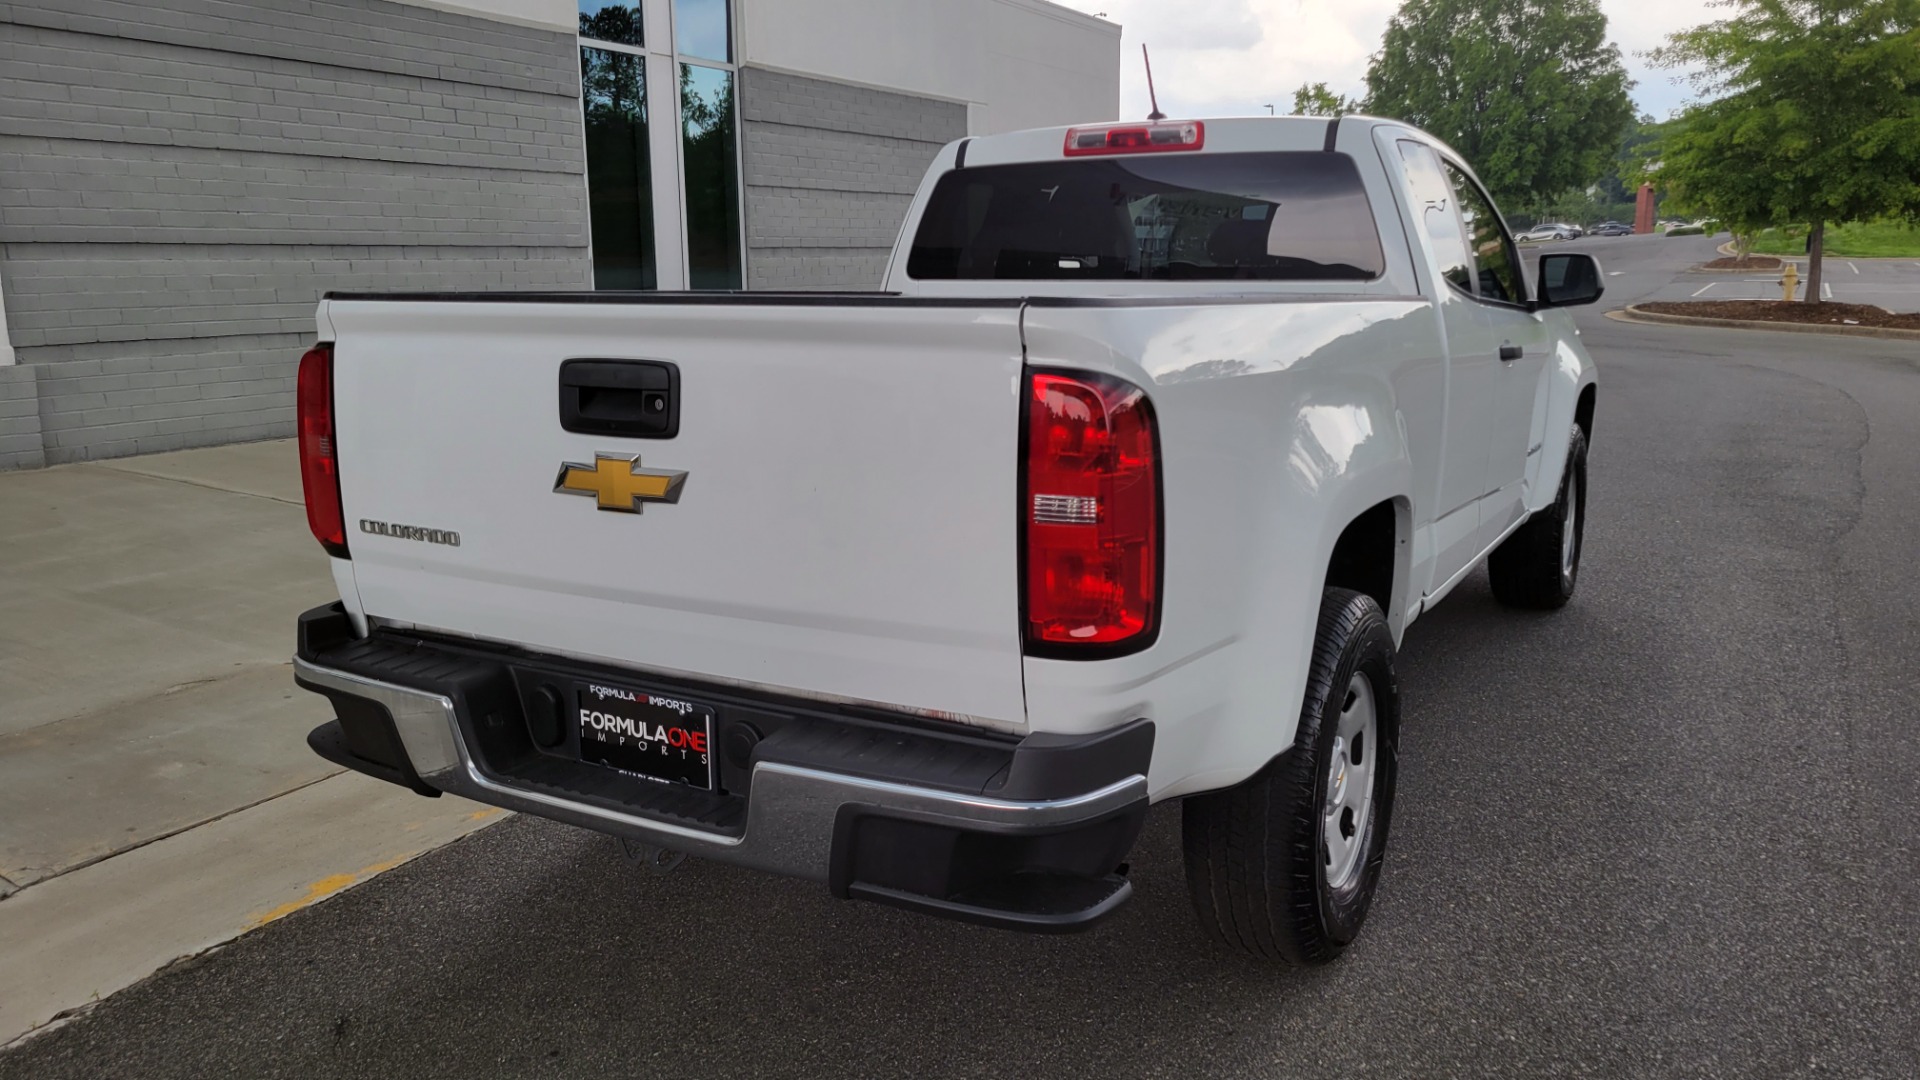 Used 2018 Chevrolet COLORADO EXT CAB / 2.5L / 2WD / 6-SPD AUTO / WORK TRUCK / REARVIEW for sale Sold at Formula Imports in Charlotte NC 28227 9